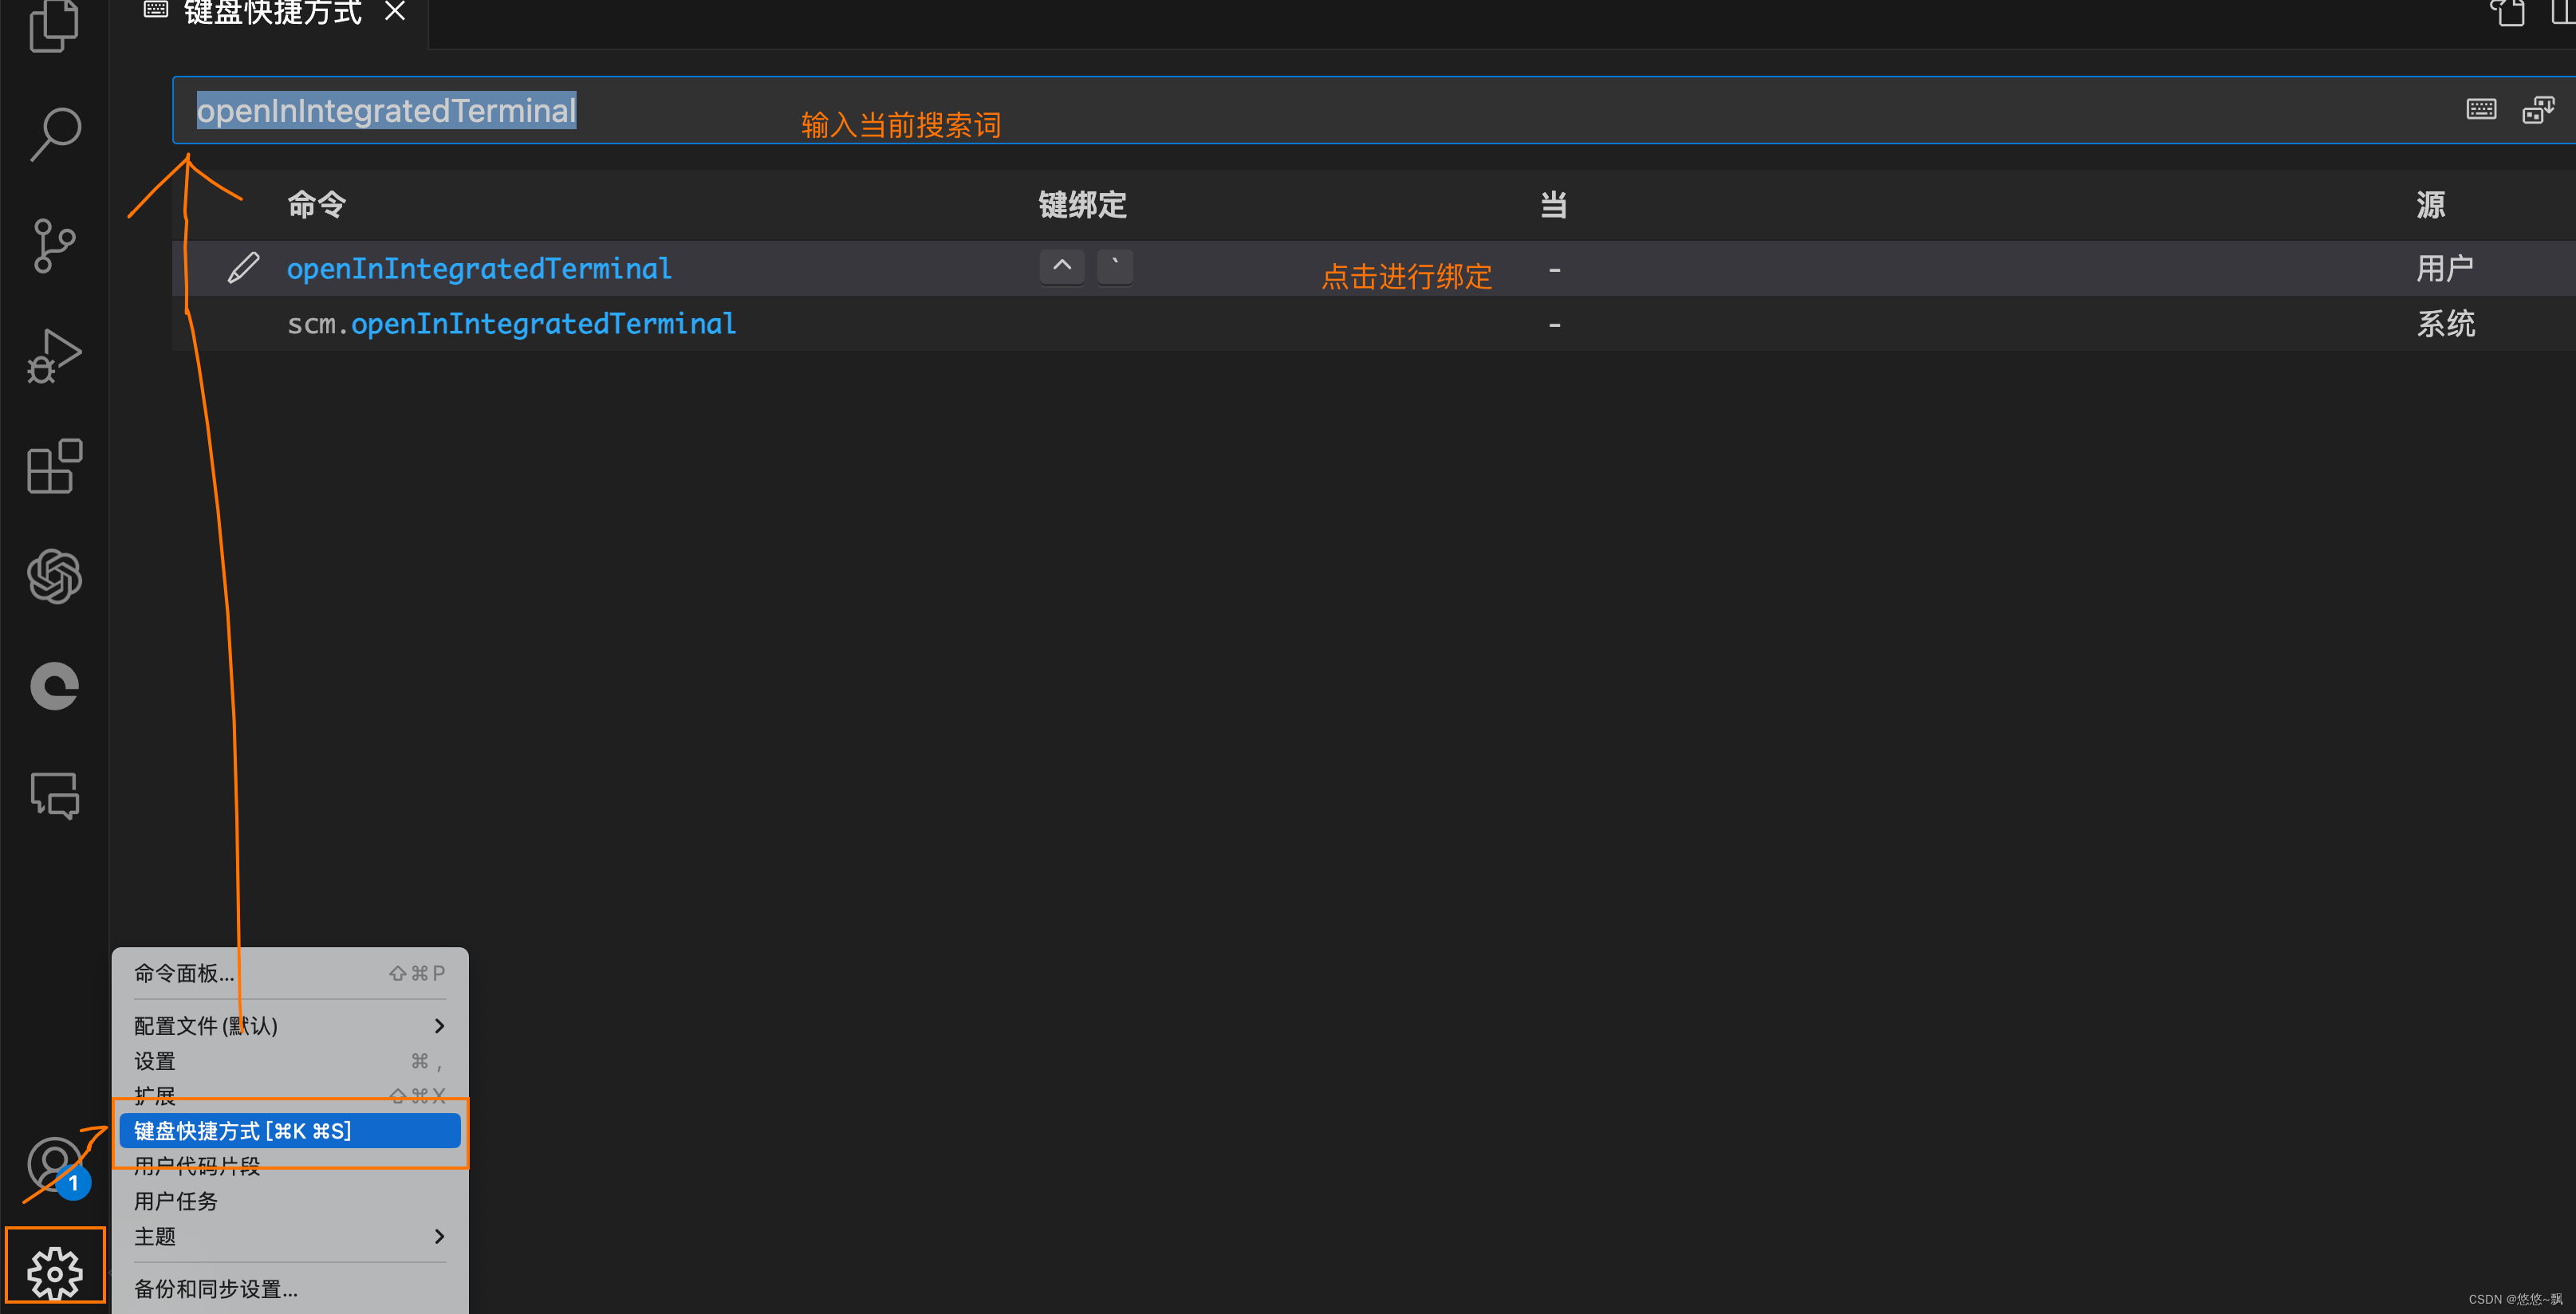 VScode 集成<span style='color:red;'>终端</span><span style='color:red;'>设置</span>默认打开<span style='color:red;'>当前</span><span style='color:red;'>文件夹</span> <span style='color:red;'>mac</span><span style='color:red;'>系统</span>